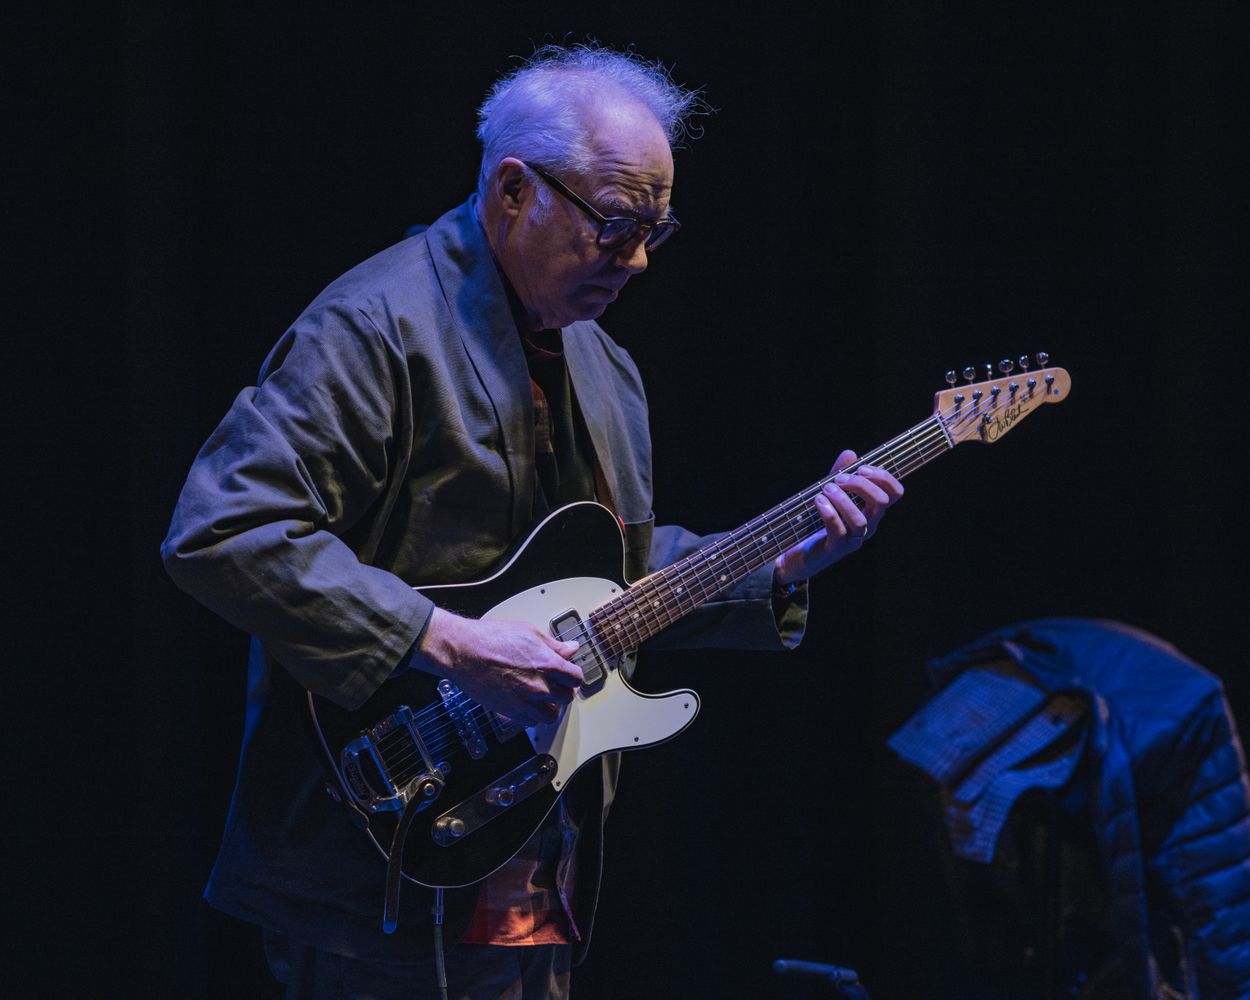 Bill Frisell - contemporary guitar player, composer - WOW!